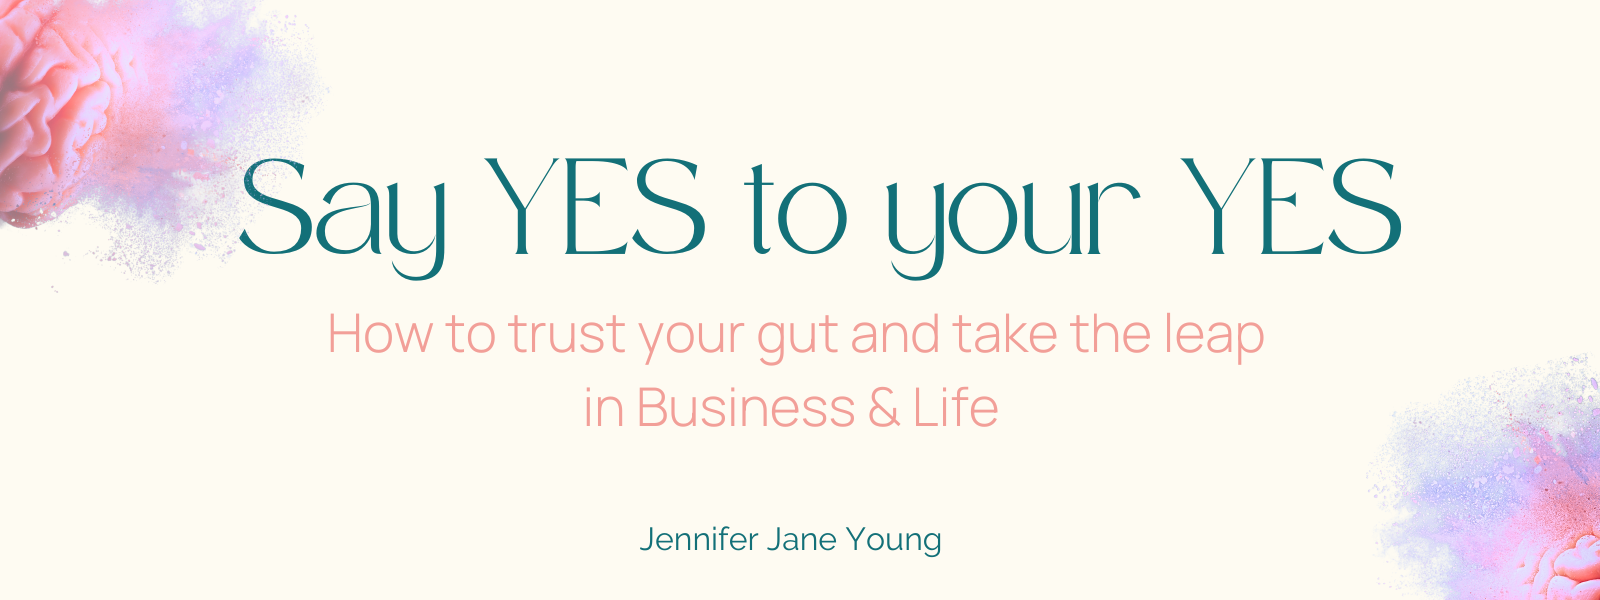 Say Yes to your Yes-Jennifer Jane Young-Intuition-business